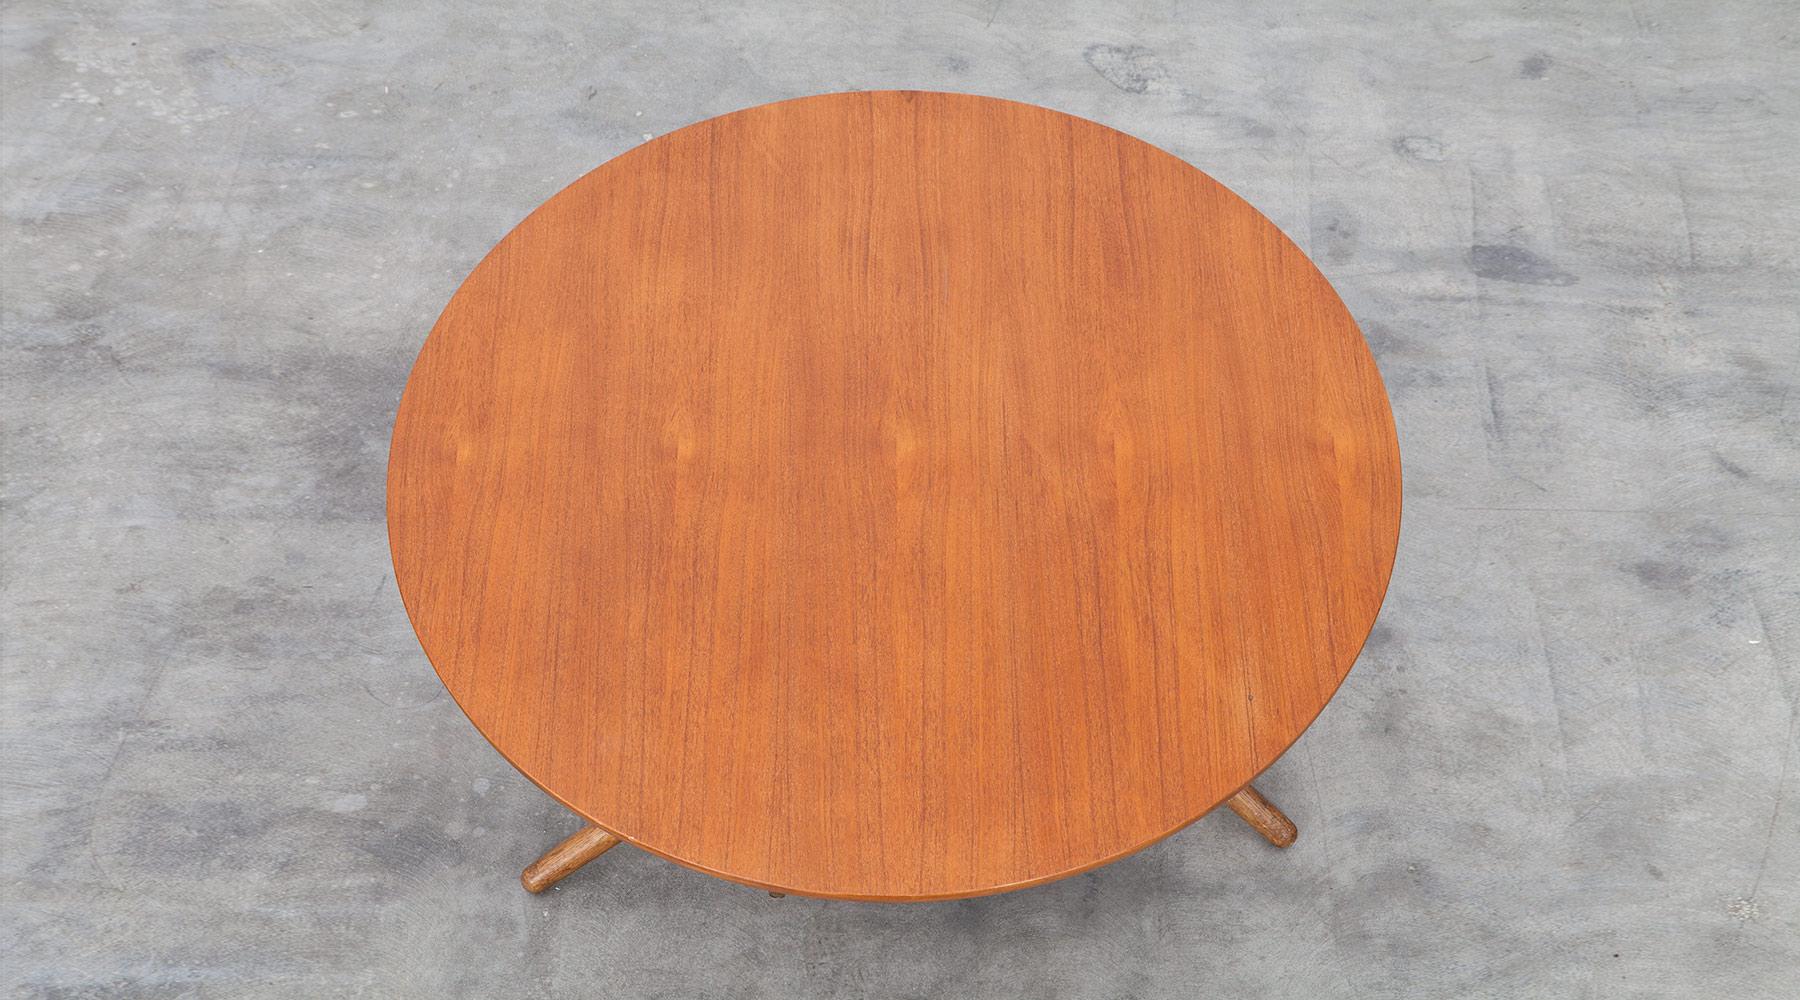 Mid-Century Modern 1950s Brown Wooden Eat and Tea Table by Jürg Bally 'k'